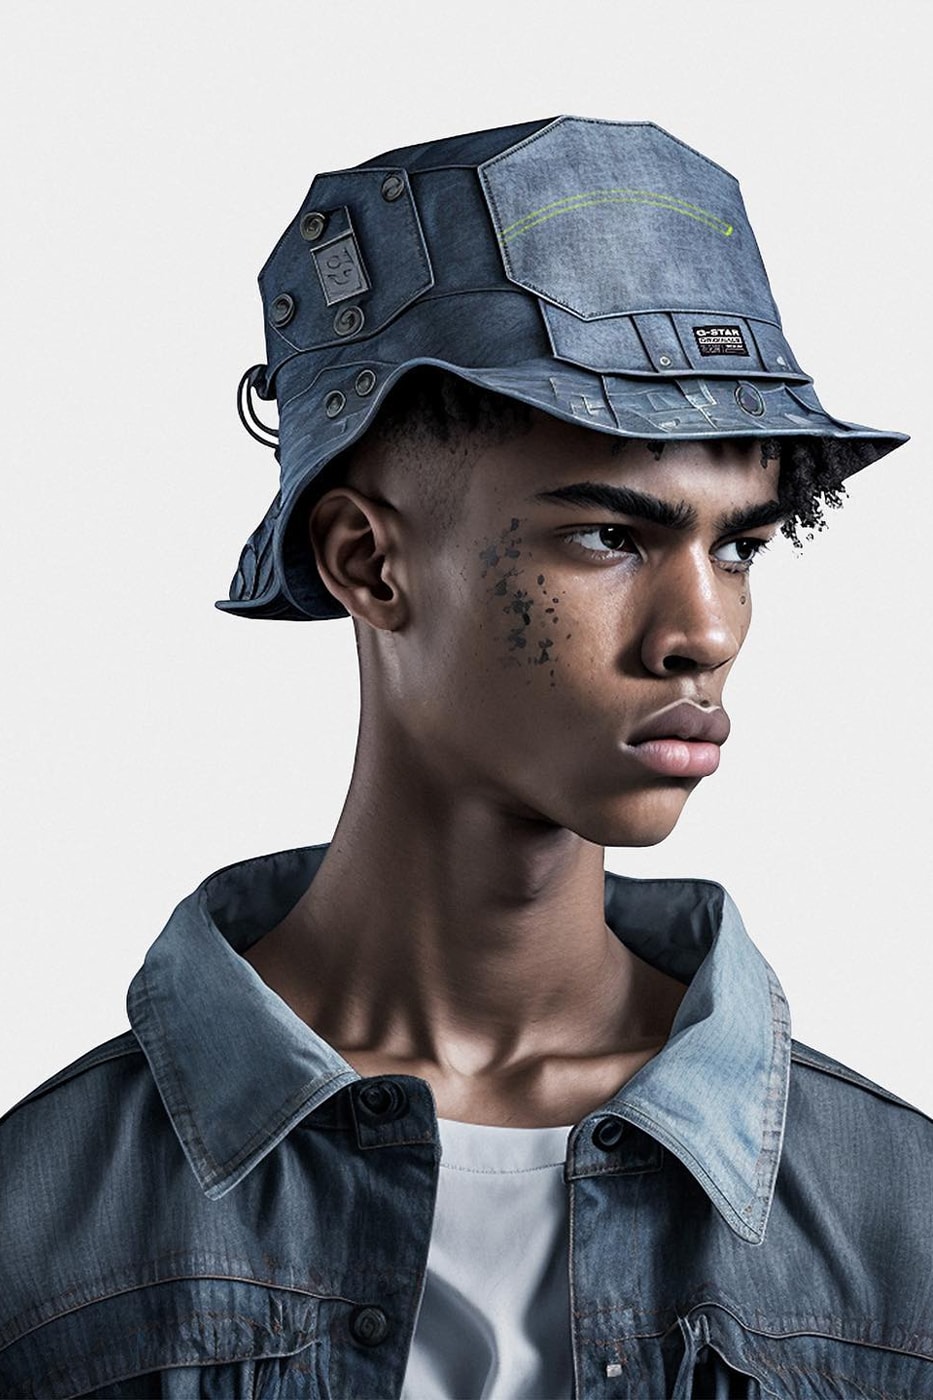 G-Star RAW Releases AI-Designed Denim Collection | Hypebeast